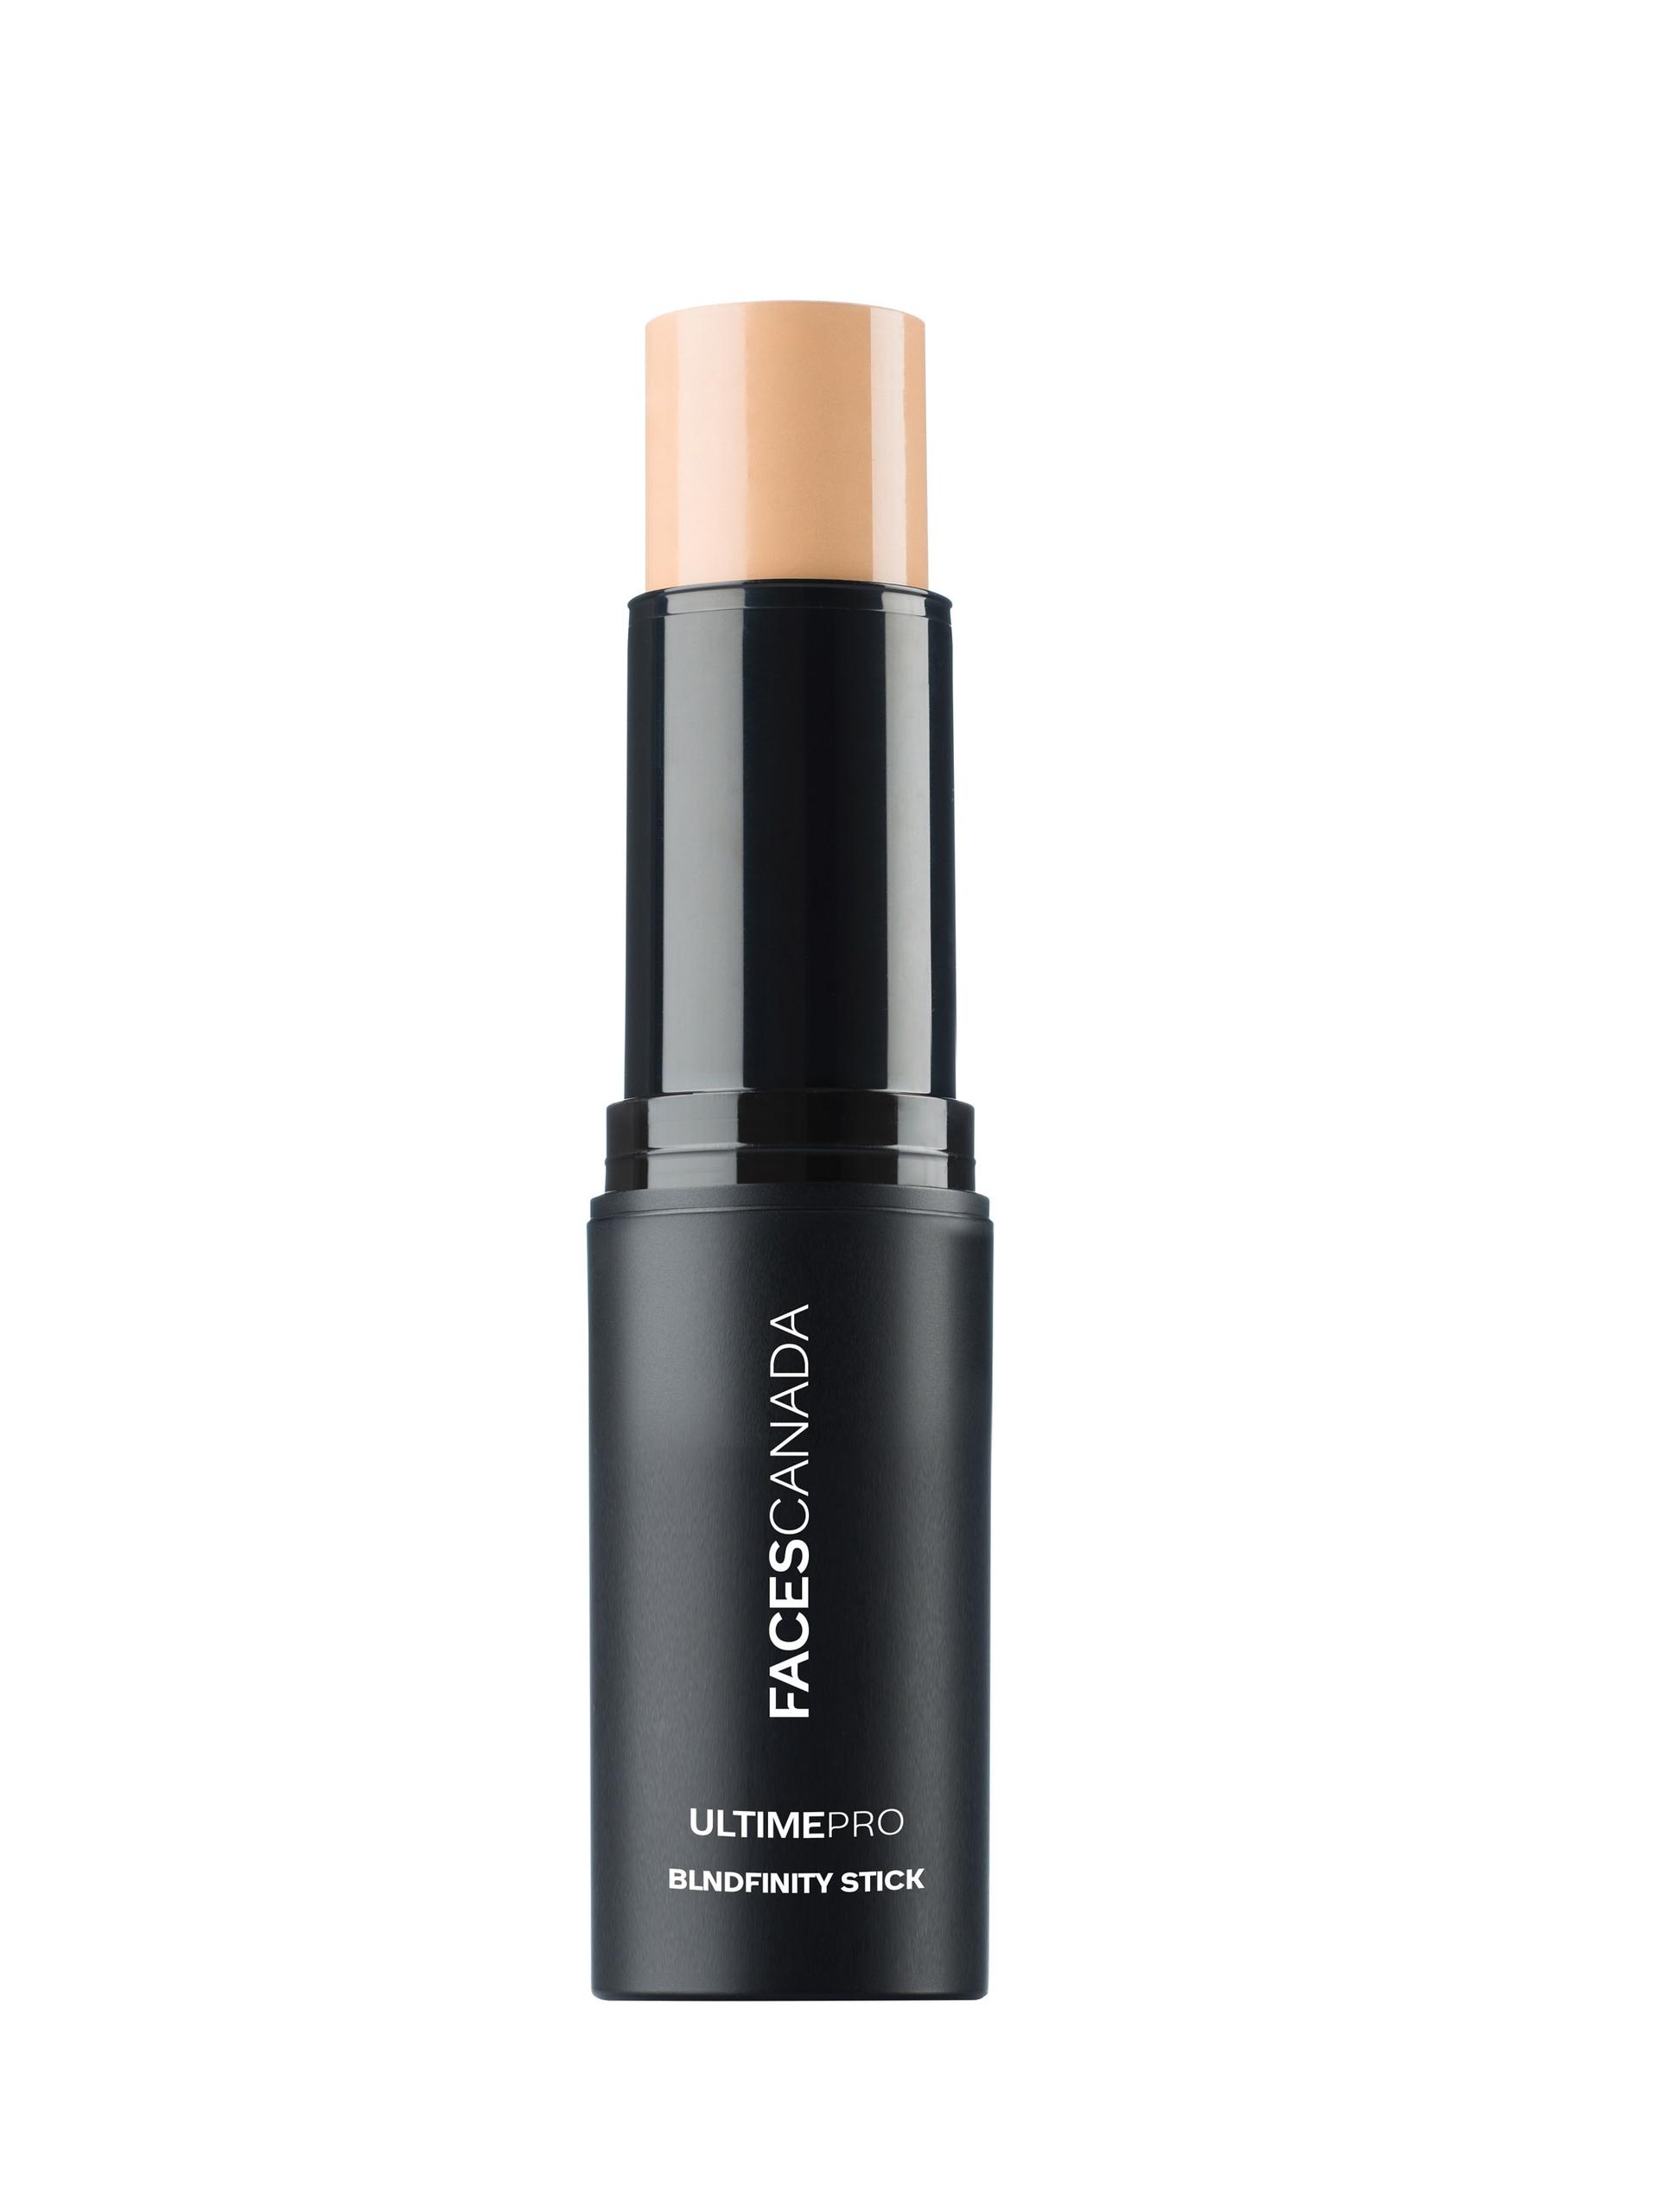 faces-canada-ultime-pro-blendfinity-stick-foundation-11g---ivory-01